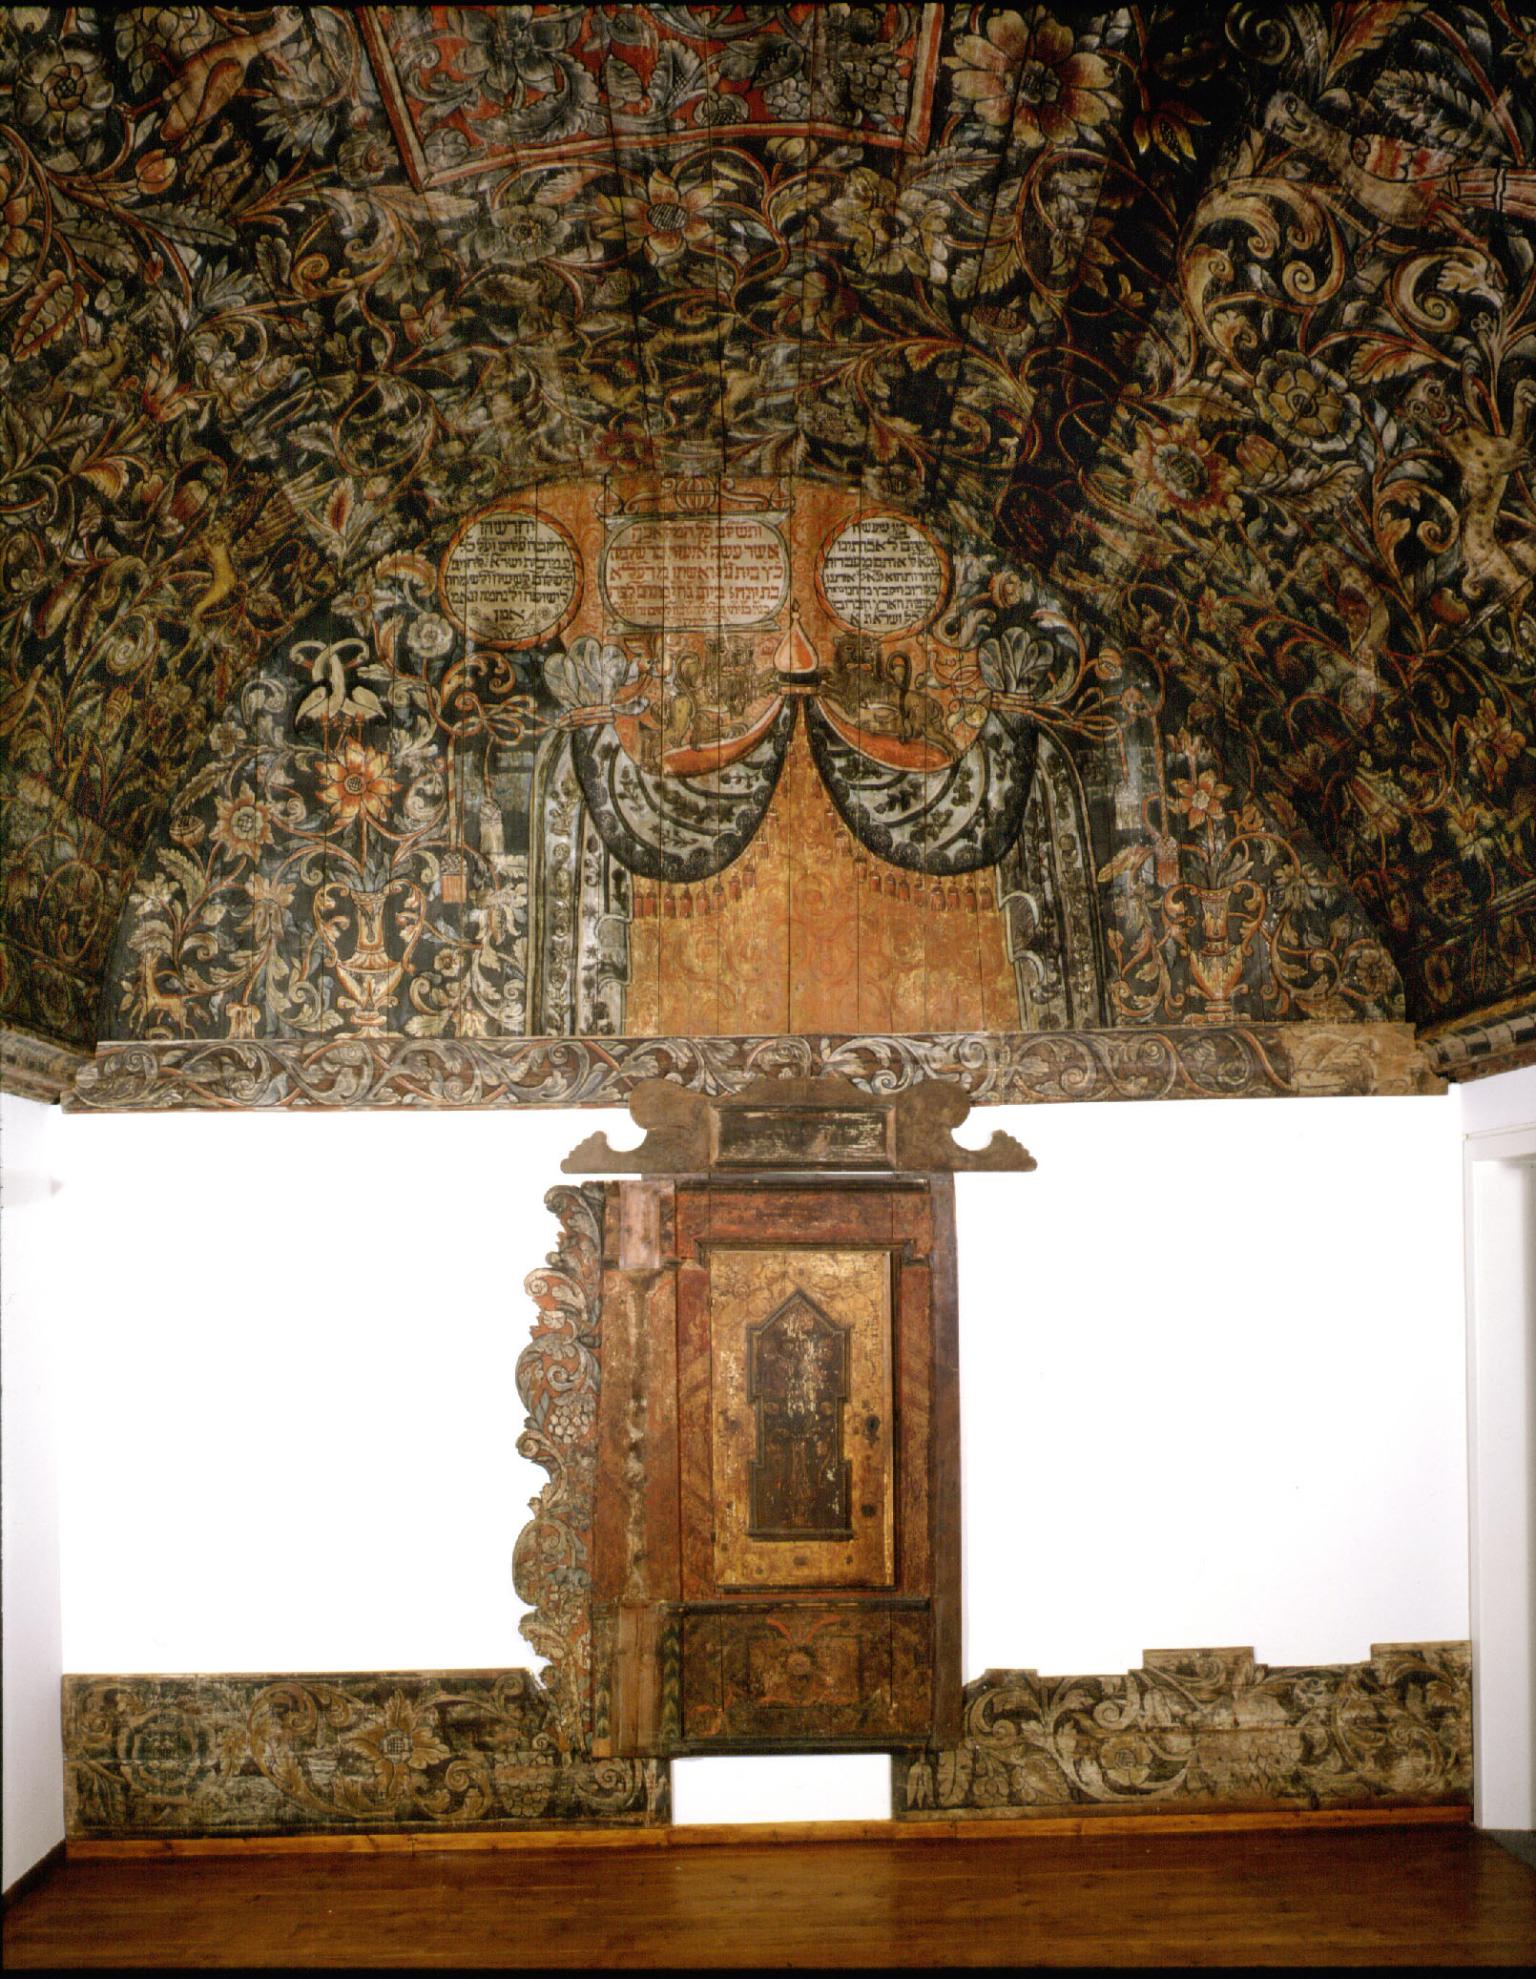 Photograph of wall and ceiling painted with vegetation and zoological motifs.